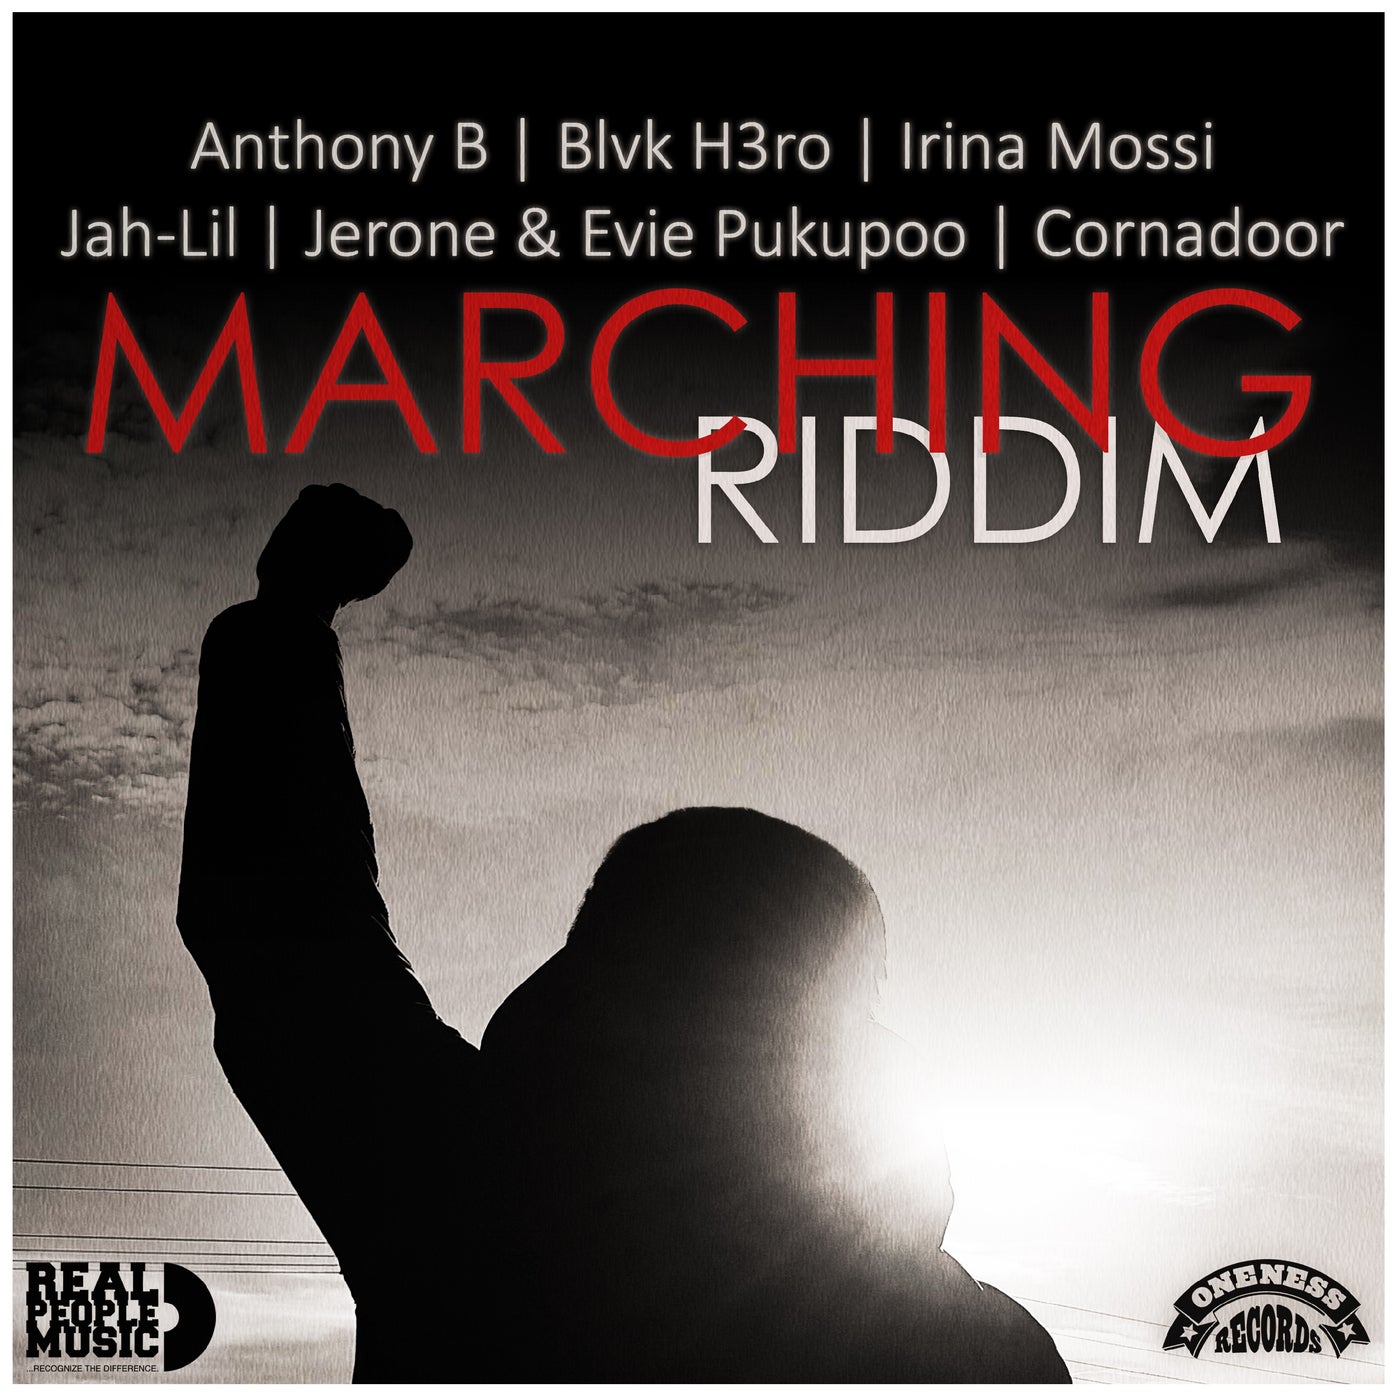 Marching Riddim (Real People Music Presents)